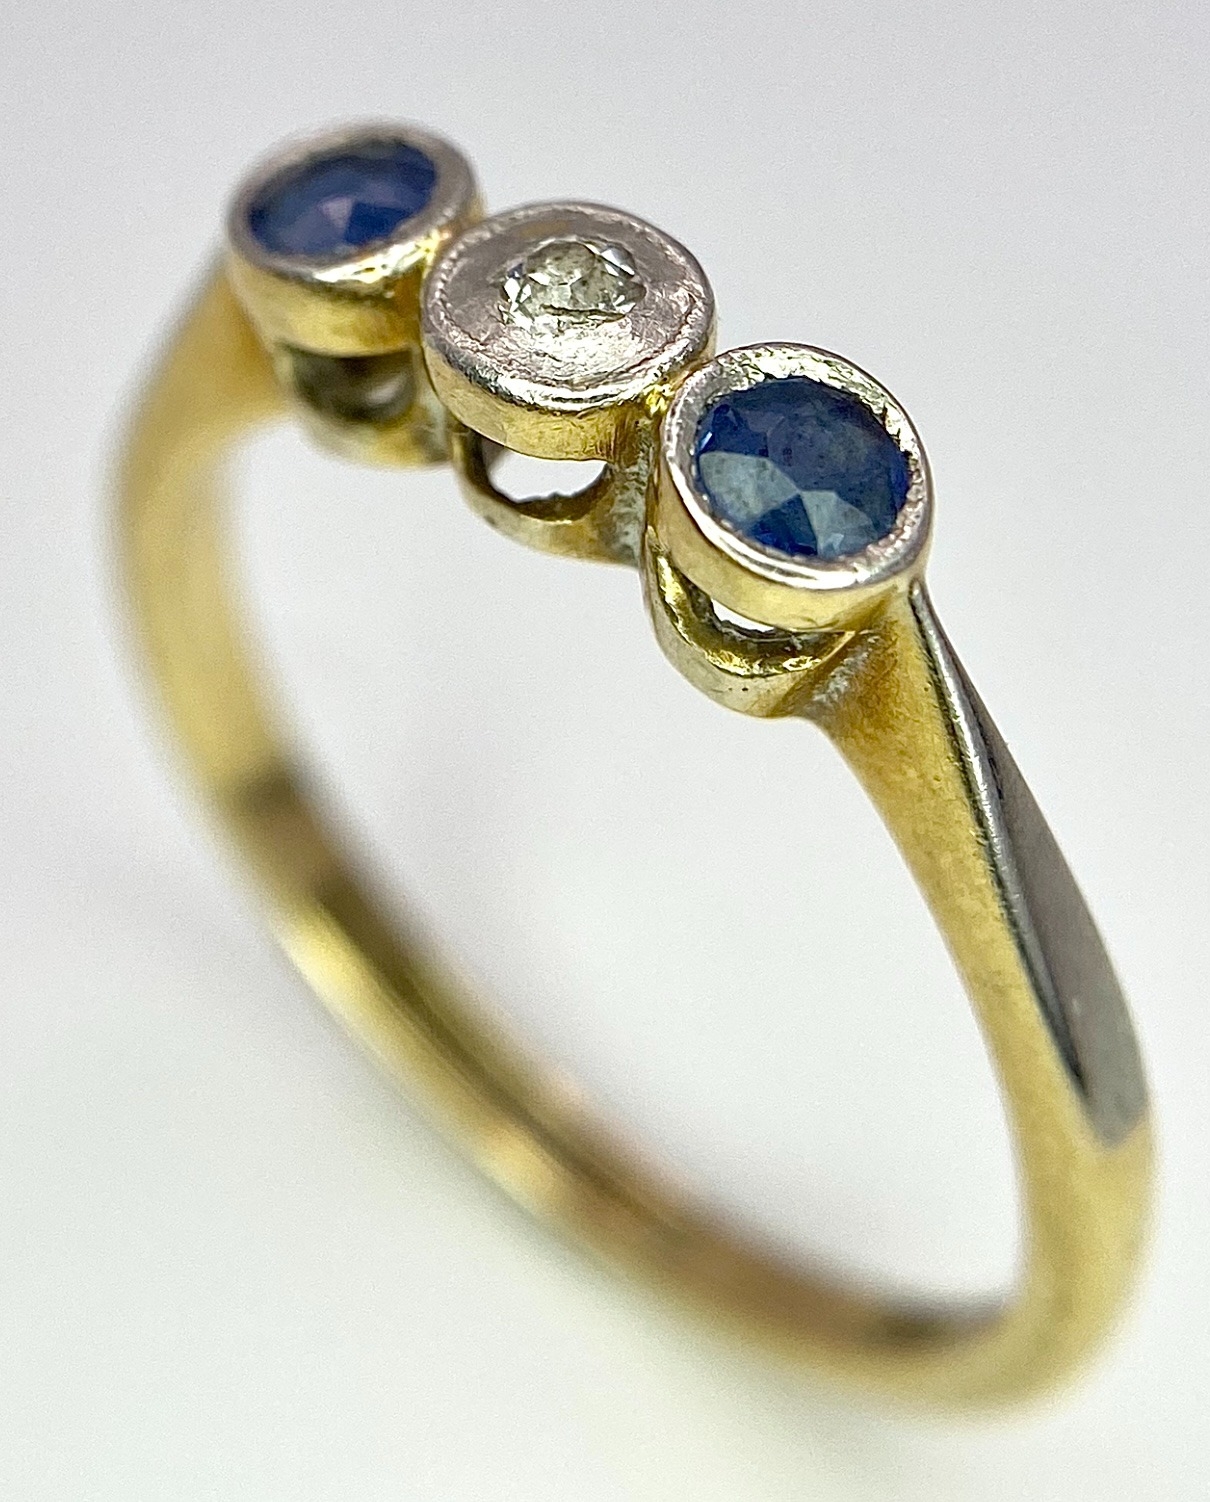 AN 18K YELLOW GOLD DIAMOND & SAPPHIRE 3 STONE RING. Size N, 2.6g total weight. Ref: SC 8059 - Image 5 of 7